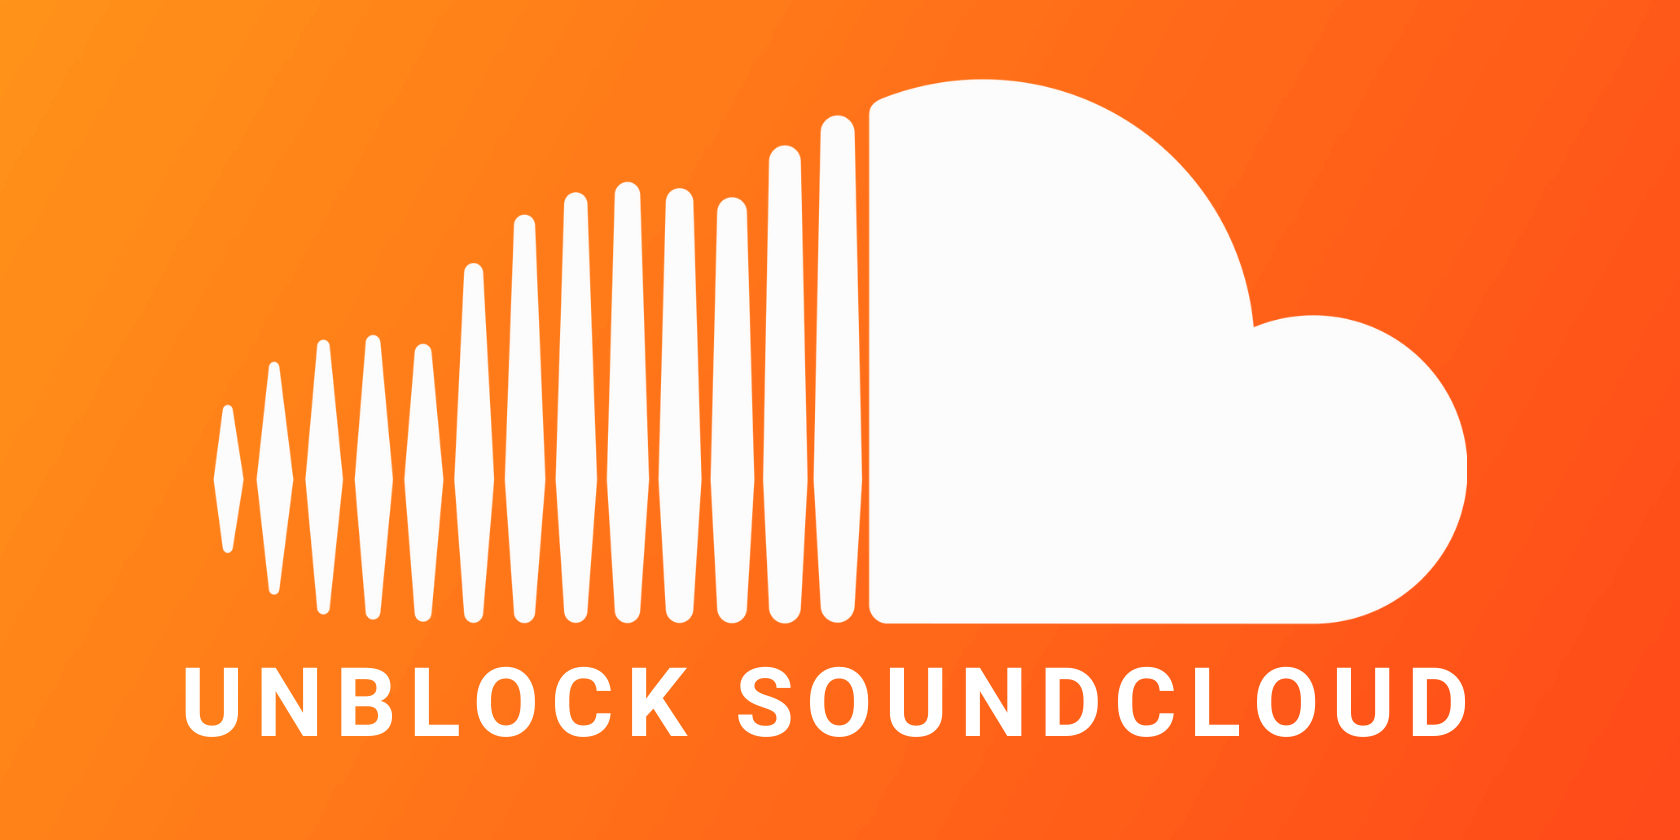 How to Unblock SoundCloud (Fully Explained)